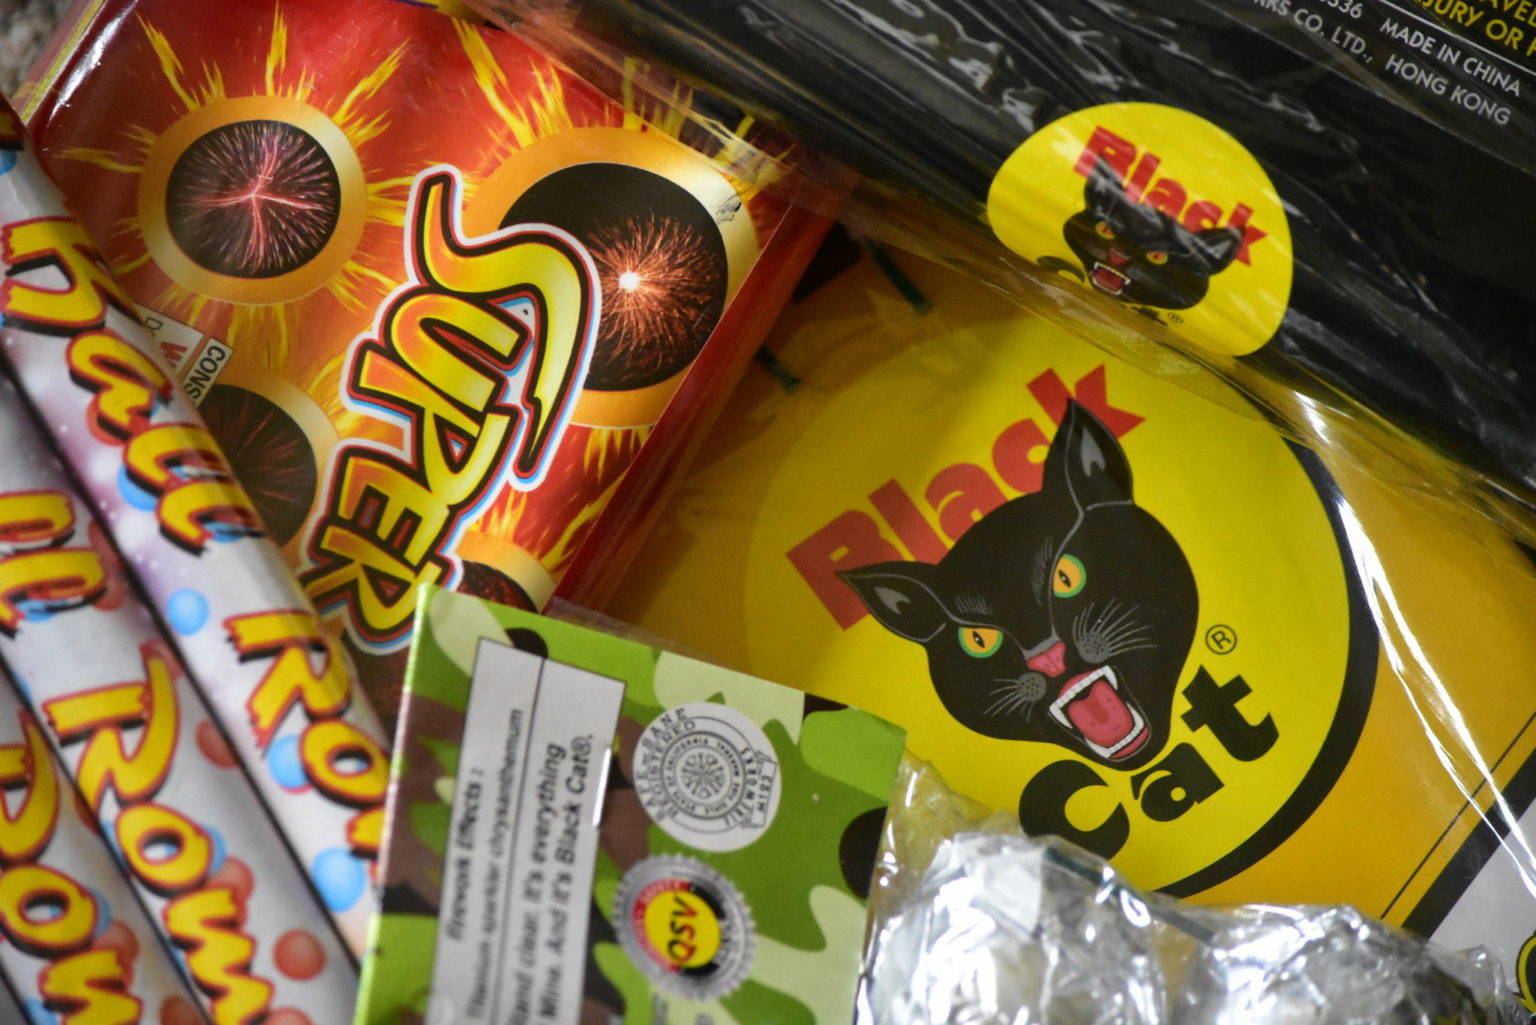 Because of a worldwide shortage of fireworks this summer, the Central Council of Tlingit and Haida Indian Tribes of Alaska only received about one-third of the products they ordered to sell locally. (Peter Segall / Juneau Empire File)